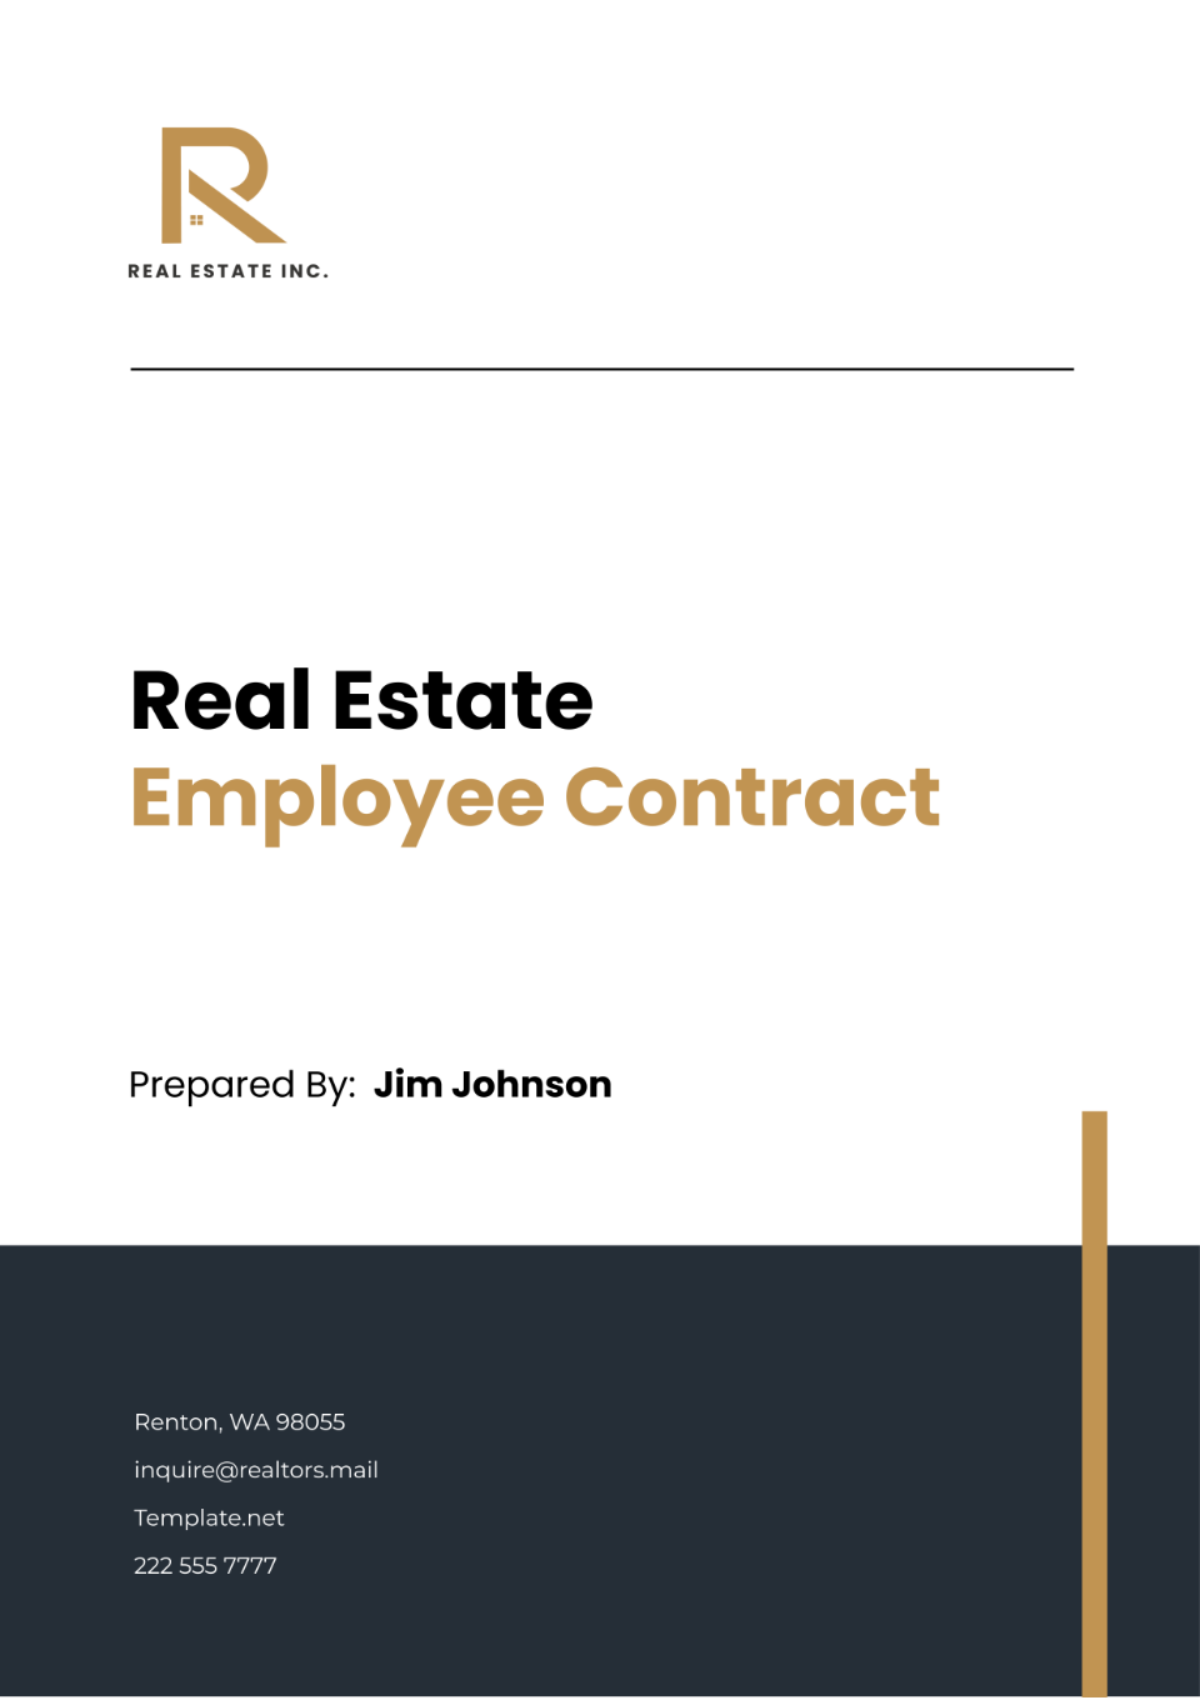 Free Real Estate Employee Contract Template